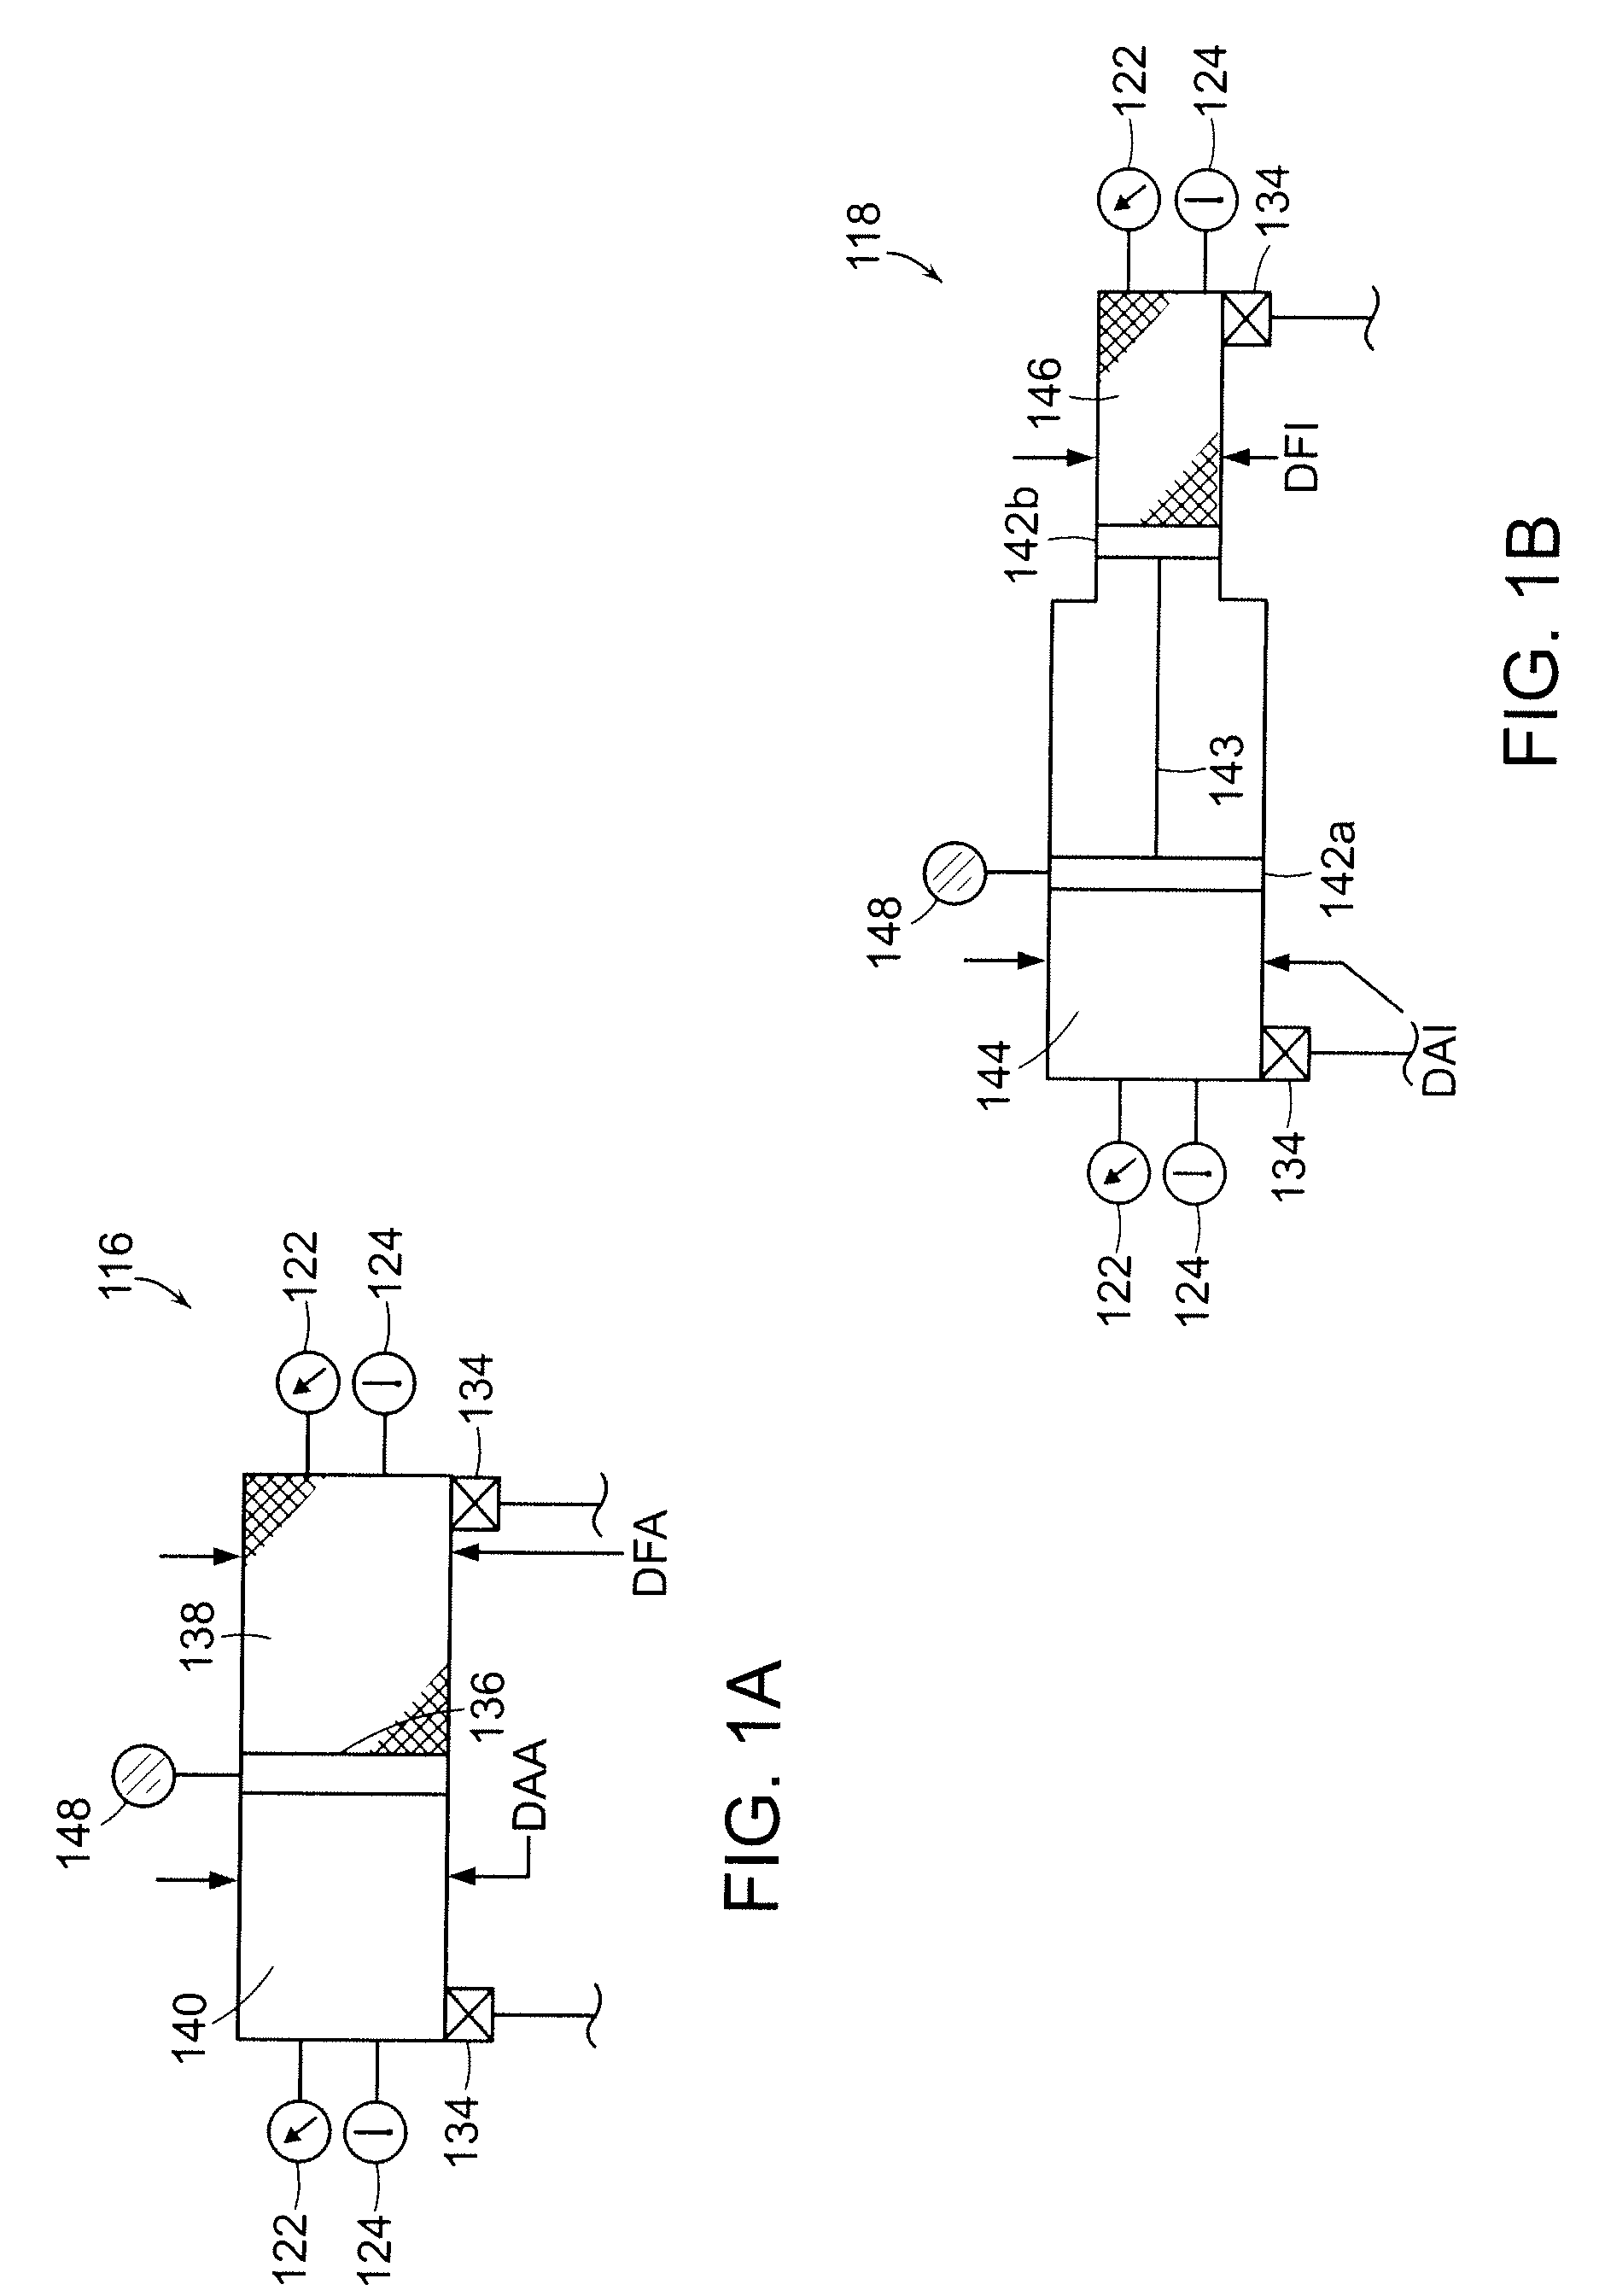 Systems and Methods for Energy Storage and Recovery Using Rapid Isothermal Gas Expansion and Compression